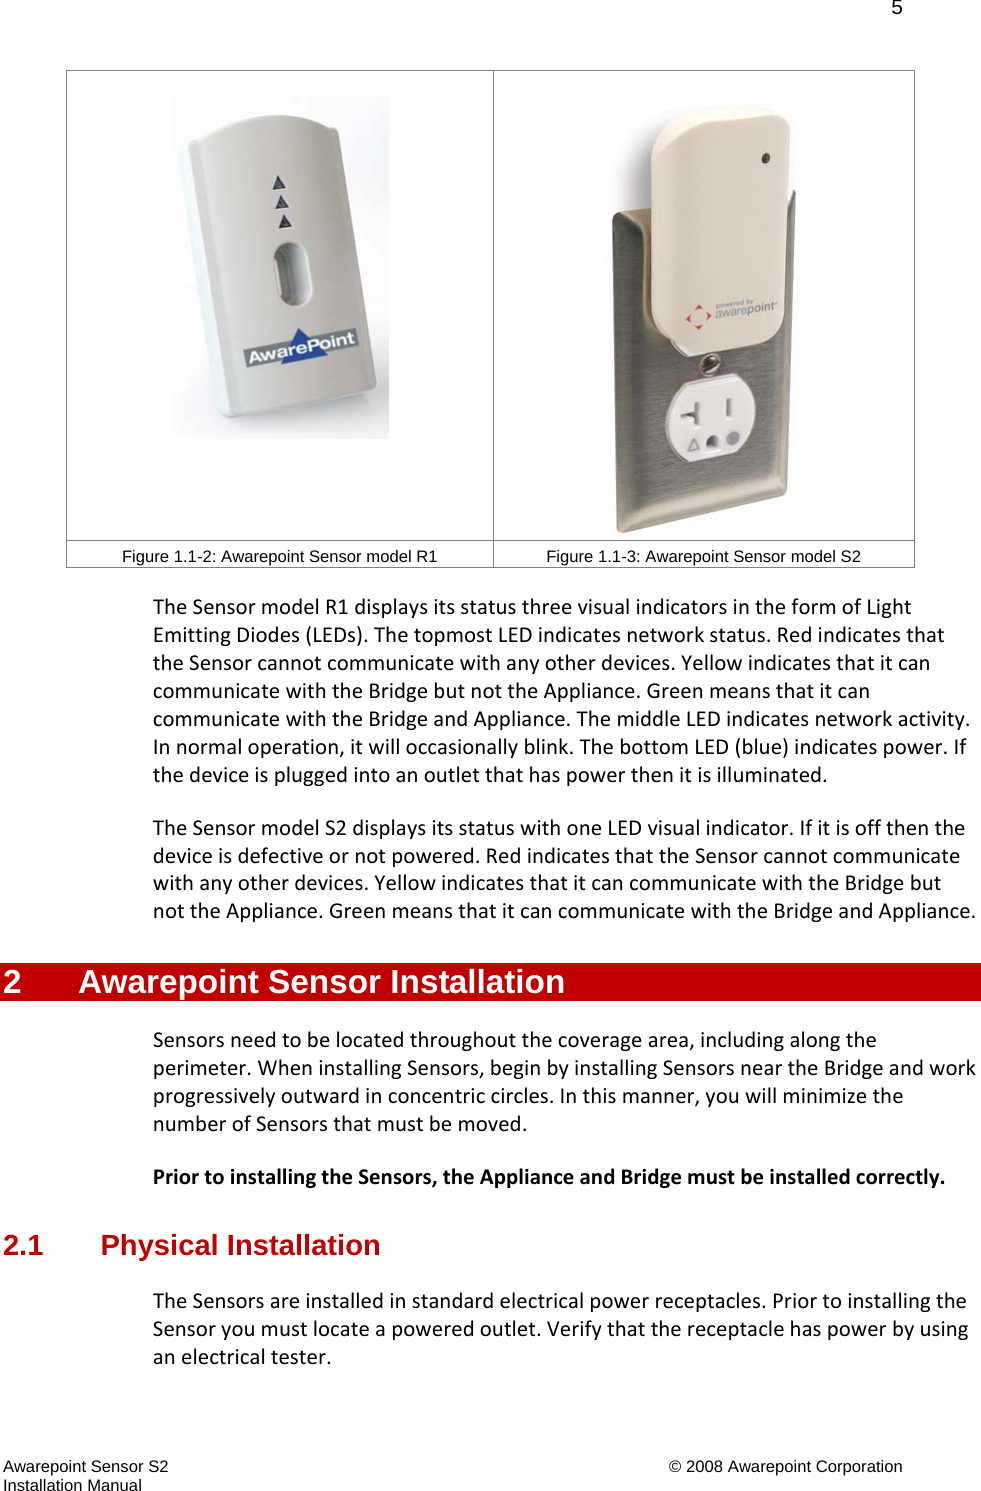   5 Awarepoint Sensor S2    © 2008 Awarepoint Corporation Installation Manual Figure 1.1-2: Awarepoint Sensor model R1  Figure 1.1-3: Awarepoint Sensor model S2 TheSensormodelR1displaysitsstatusthreevisualindicatorsintheformofLightEmittingDiodes(LEDs).ThetopmostLEDindicatesnetworkstatus.RedindicatesthattheSensorcannotcommunicatewithanyotherdevices.YellowindicatesthatitcancommunicatewiththeBridgebutnottheAppliance.GreenmeansthatitcancommunicatewiththeBridgeandAppliance.ThemiddleLEDindicatesnetworkactivity.Innormaloperation,itwilloccasionallyblink.ThebottomLED(blue)indicatespower.Ifthedeviceispluggedintoanoutletthathaspowerthenitisilluminated.TheSensormodelS2displaysitsstatuswithoneLEDvisualindicator.Ifitisoffthenthedeviceisdefectiveornotpowered.RedindicatesthattheSensorcannotcommunicatewithanyotherdevices.YellowindicatesthatitcancommunicatewiththeBridgebutnottheAppliance.GreenmeansthatitcancommunicatewiththeBridgeandAppliance.2  Awarepoint Sensor Installation Sensorsneedtobelocatedthroughoutthecoveragearea,includingalongtheperimeter.WheninstallingSensors,beginbyinstallingSensorsneartheBridgeandworkprogressivelyoutwardinconcentriccircles.Inthismanner,youwillminimizethenumberofSensorsthatmustbemoved.PriortoinstallingtheSensors,theApplianceandBridgemustbeinstalledcorrectly.2.1 Physical Installation TheSensorsareinstalledinstandardelectricalpowerreceptacles.PriortoinstallingtheSensoryoumustlocateapoweredoutlet.Verifythatthereceptaclehaspowerbyusinganelectricaltester.